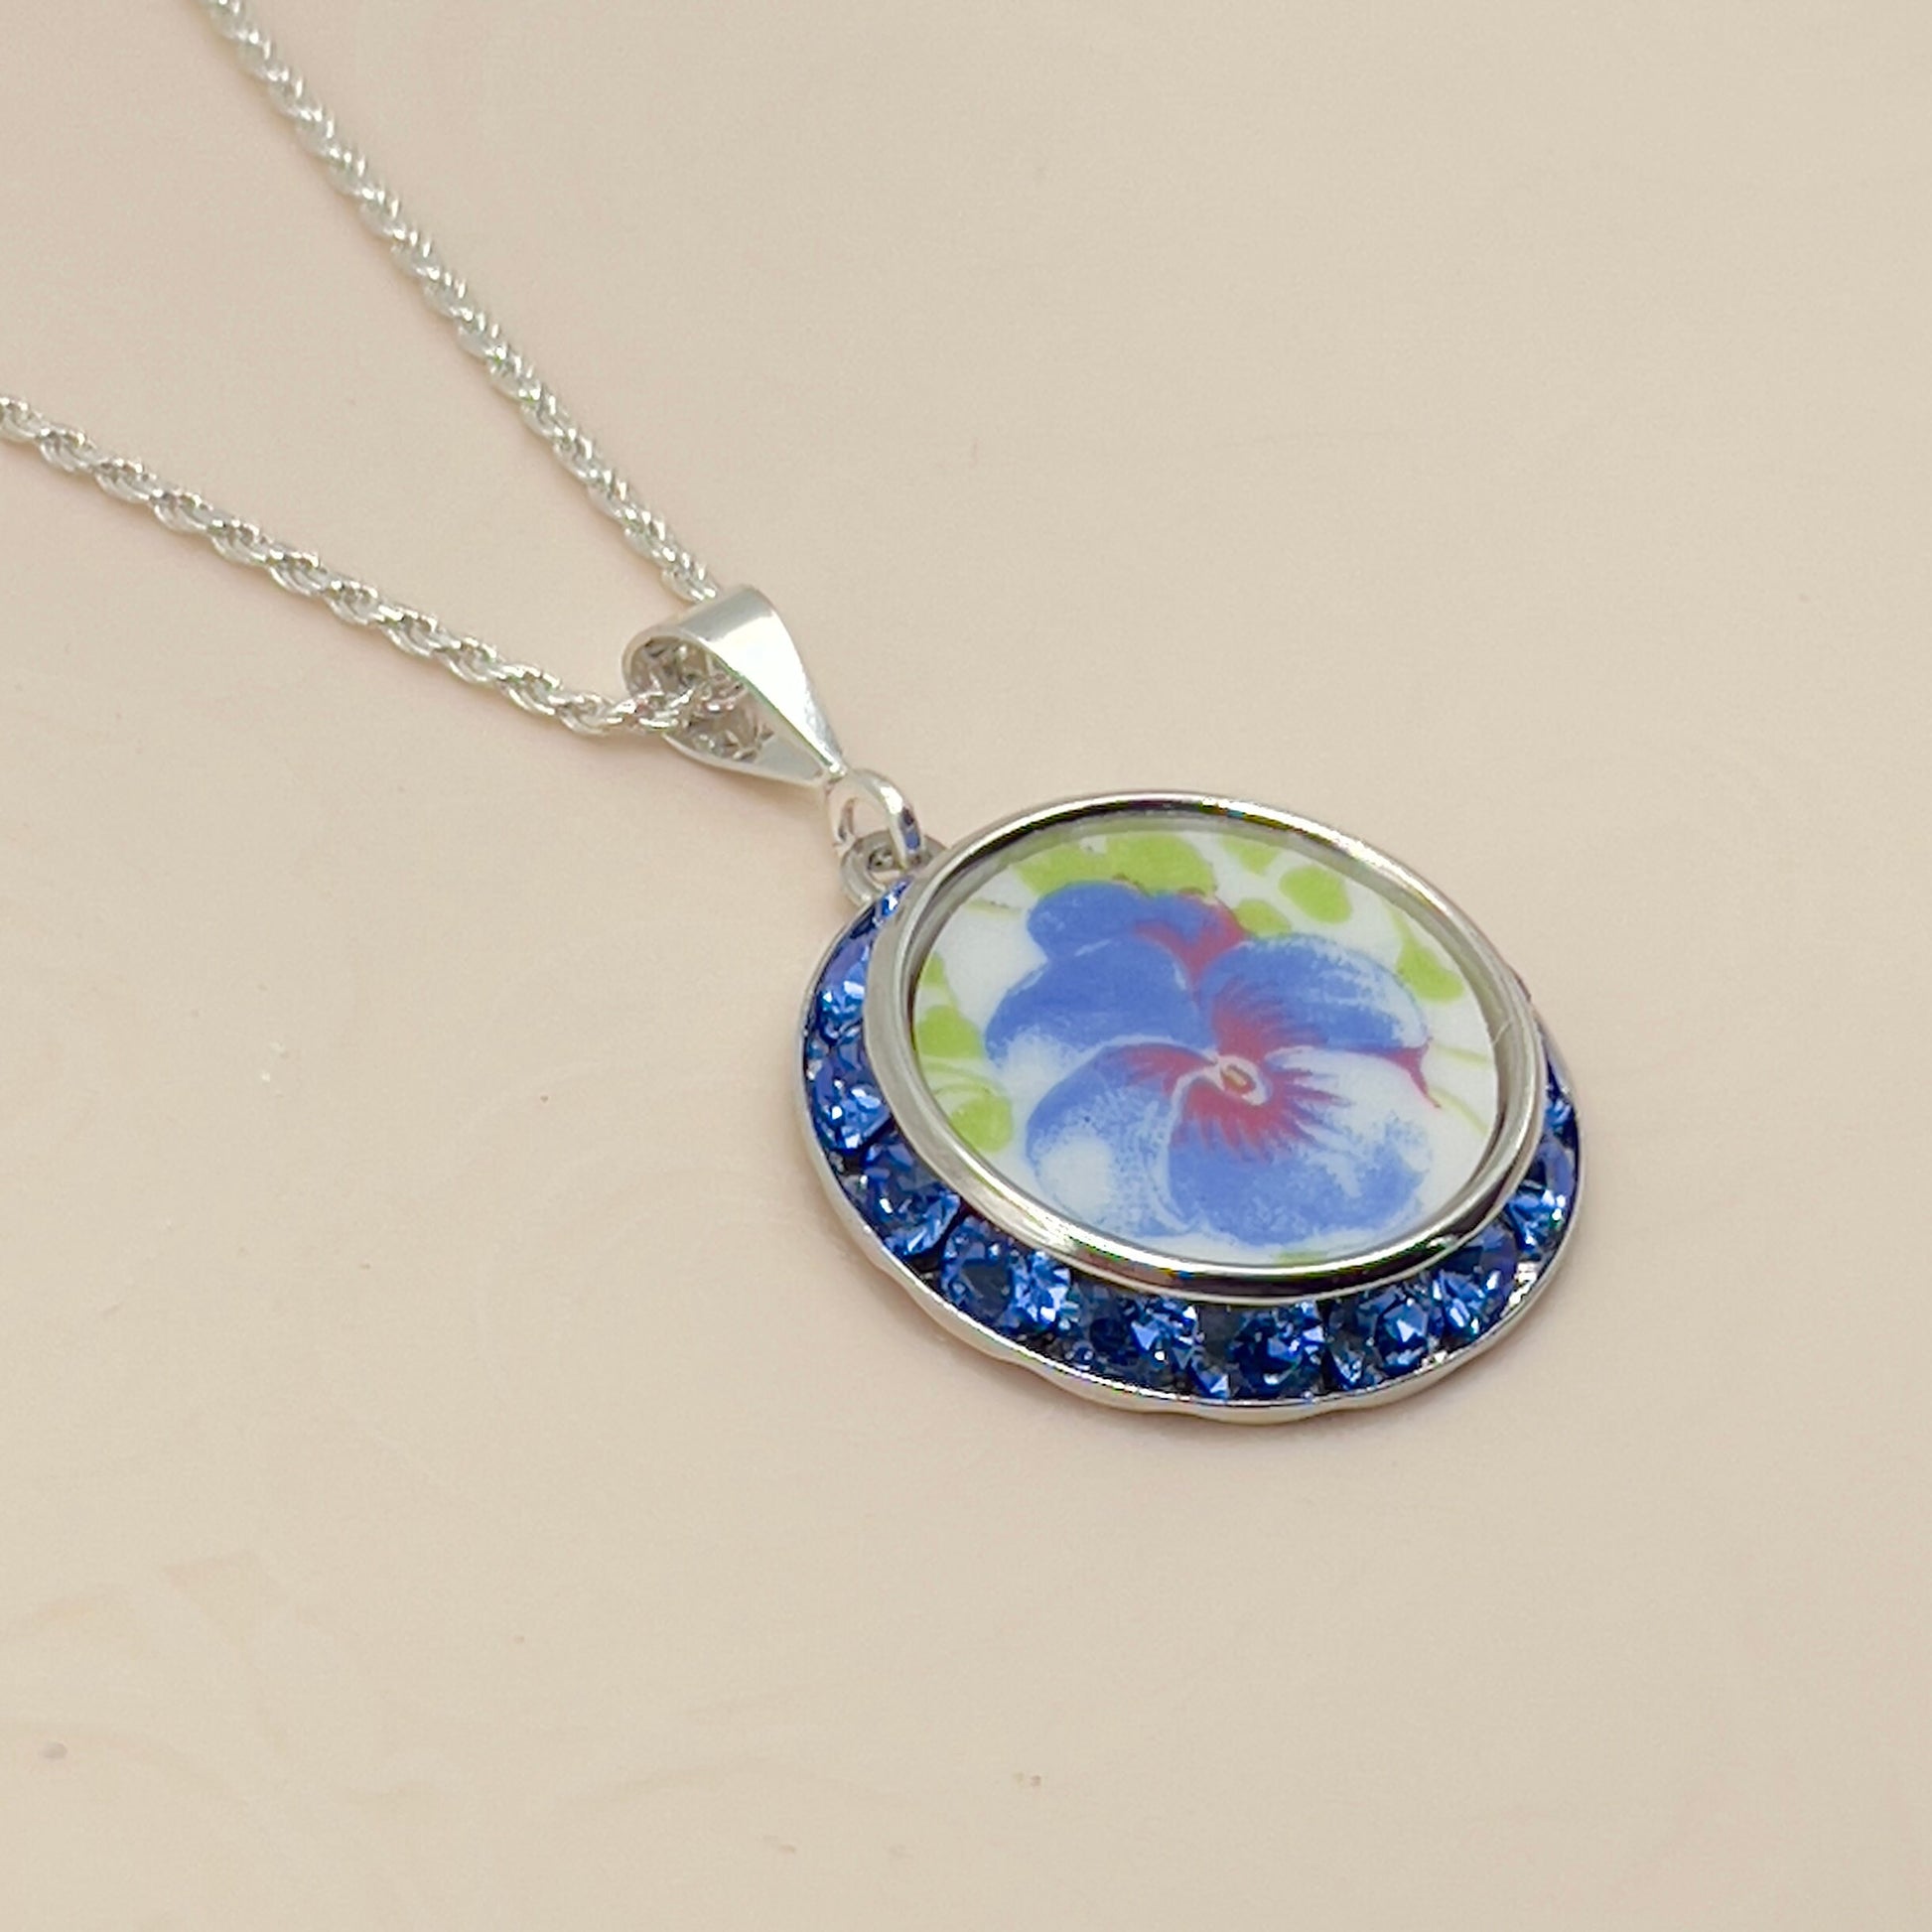 Blue Crystal Pansy Necklace, Unique Broken China Jewelry, Spring Accessories, Gifts for Women